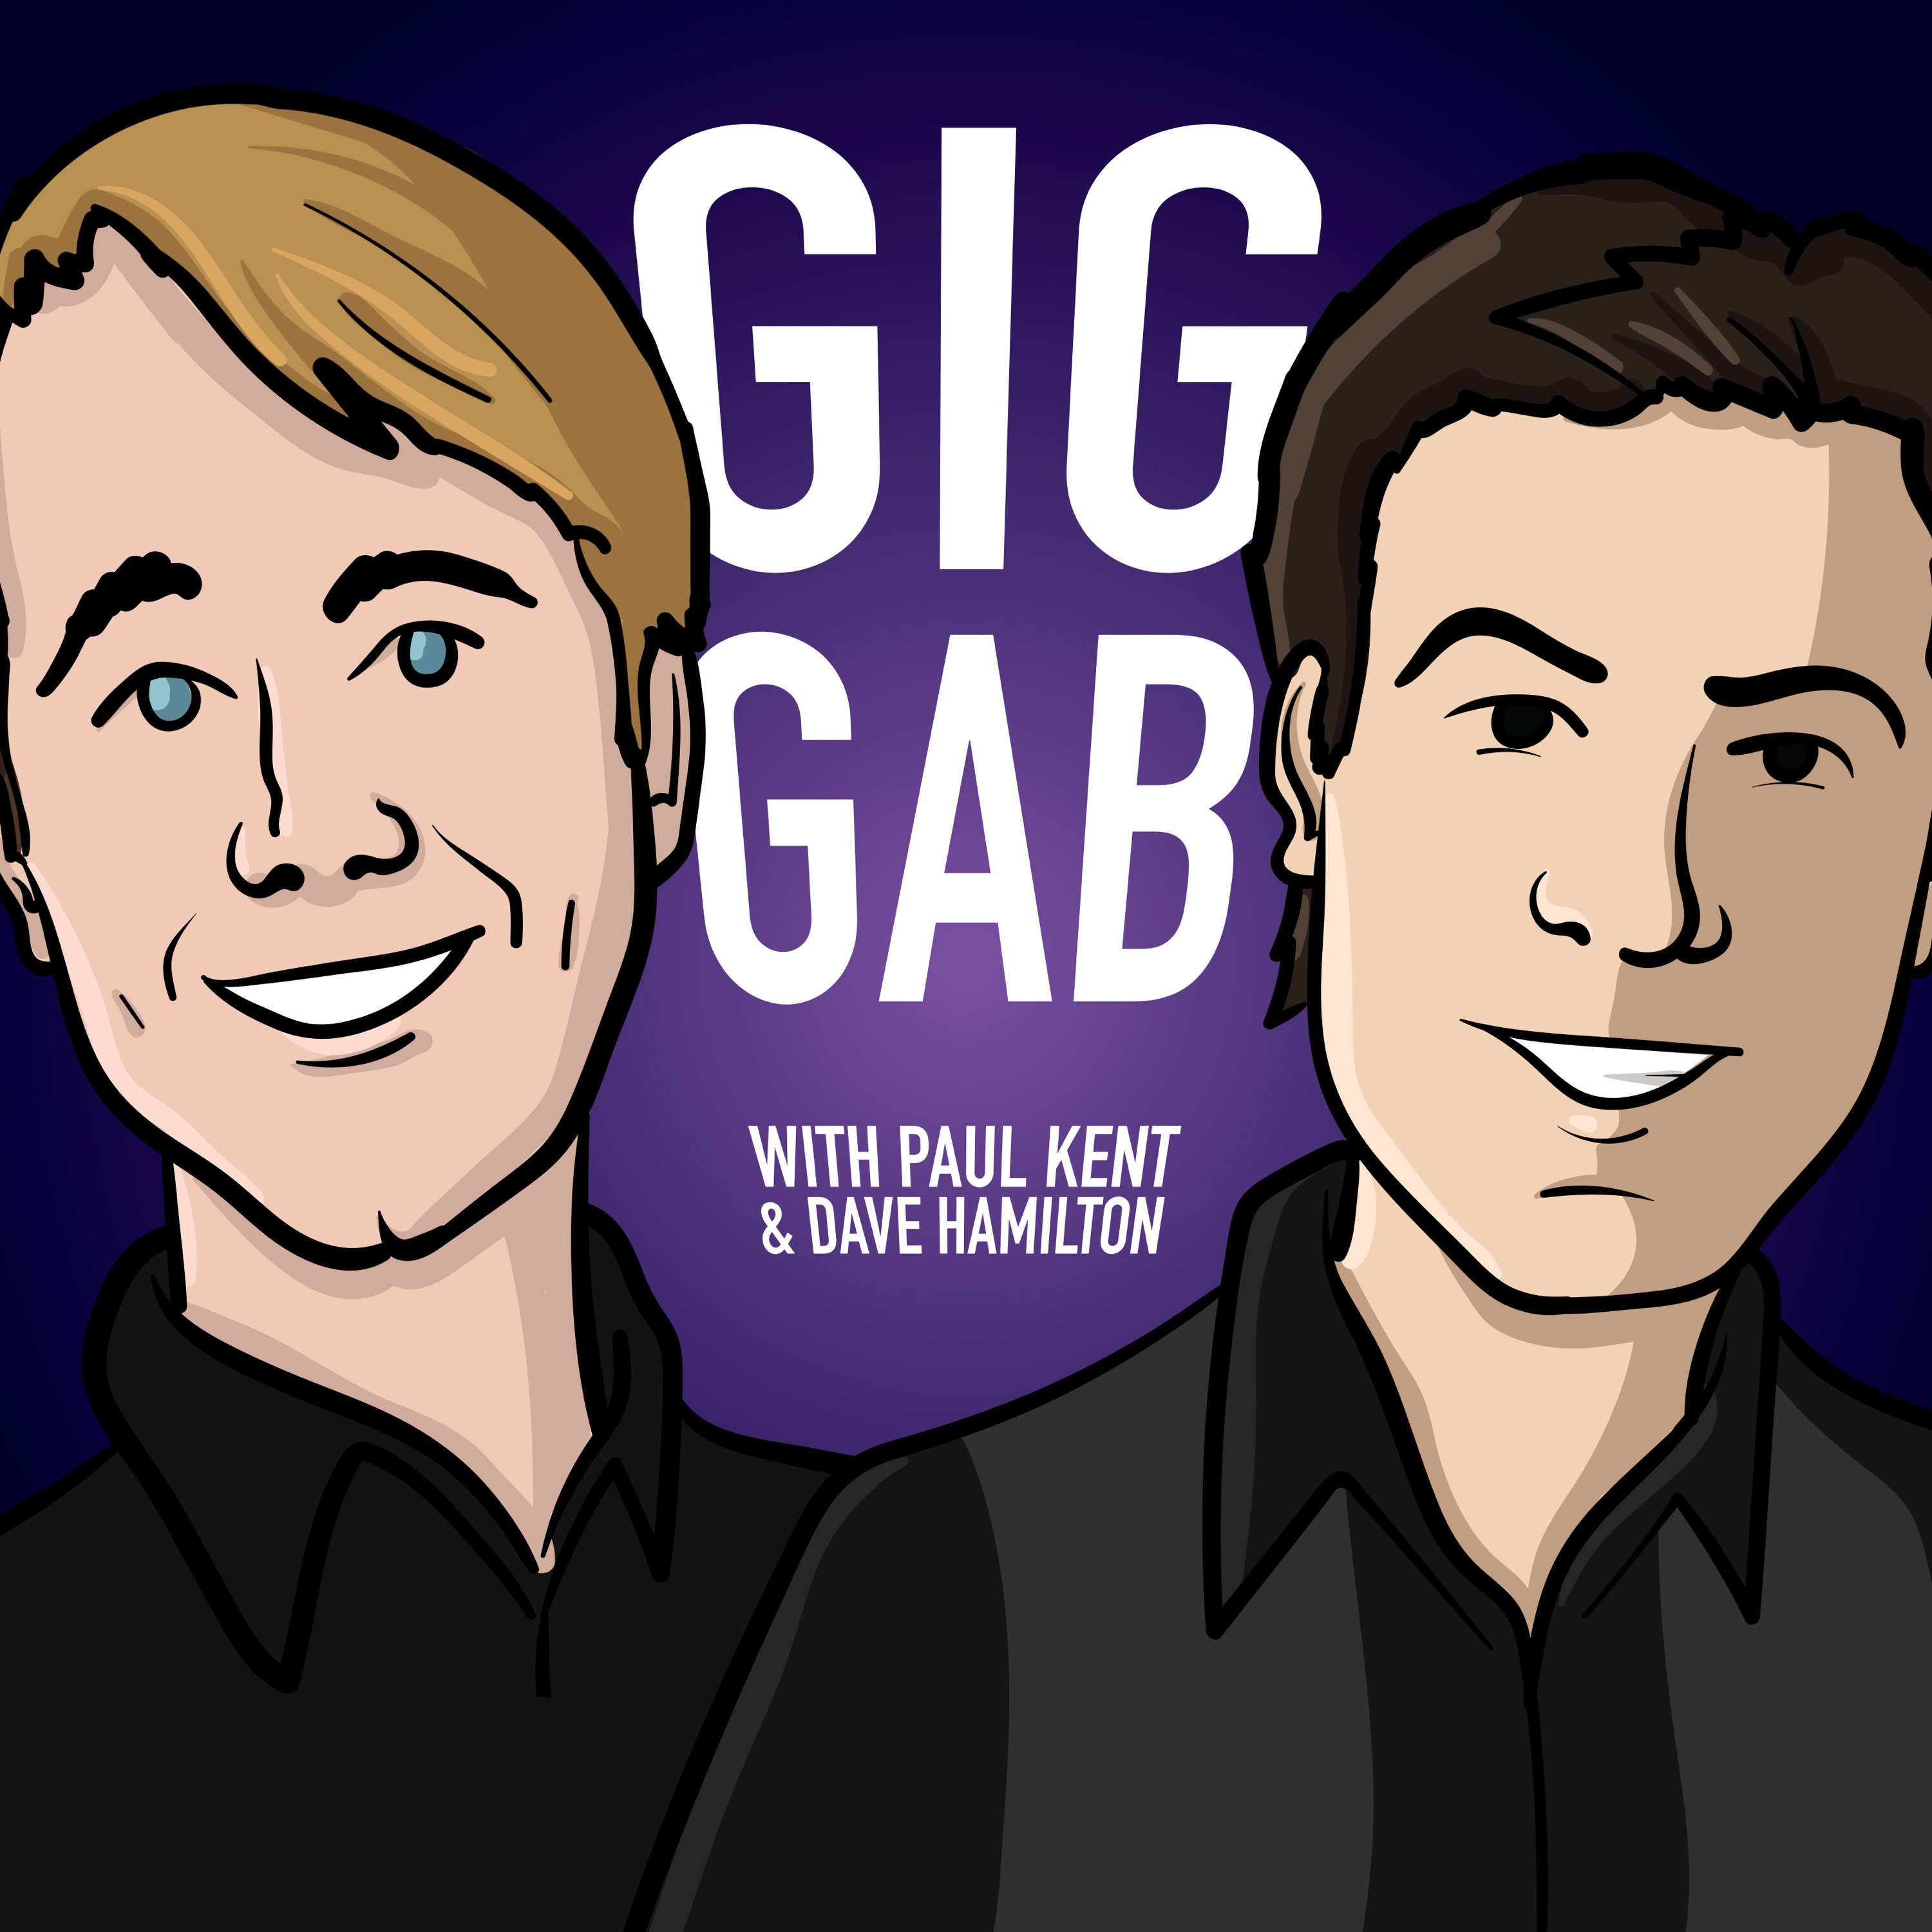 Gig Gab - The Working Musicians